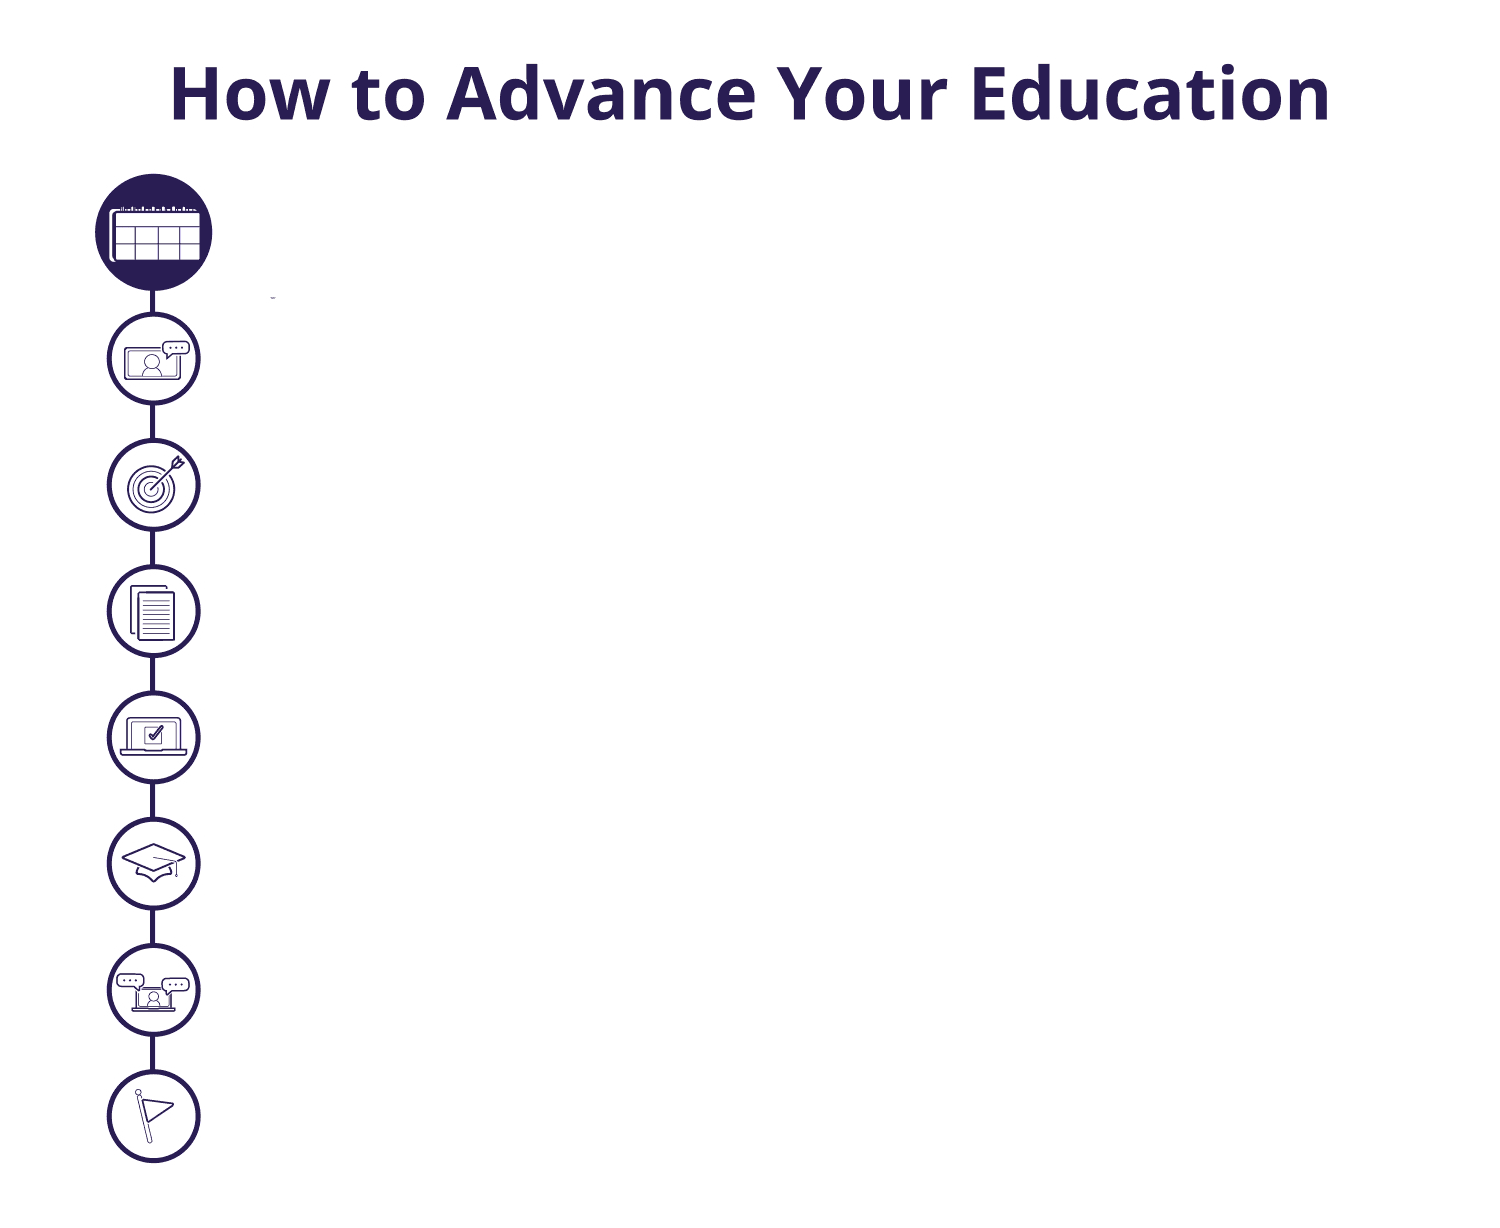 Animated gif depicting How to Advance Your Education : Book an appointment with a Kaplan Success Coach. Meet with your Coach on your requested date/time. Talk to your Coach about your goals. Complete an assessment and/or other recommended tasks. Find the right school and program to meet your needs. Enroll in your school and program of choice. Your Coach will reach out periodically and is available as often as you need to provide support. Complete your program.